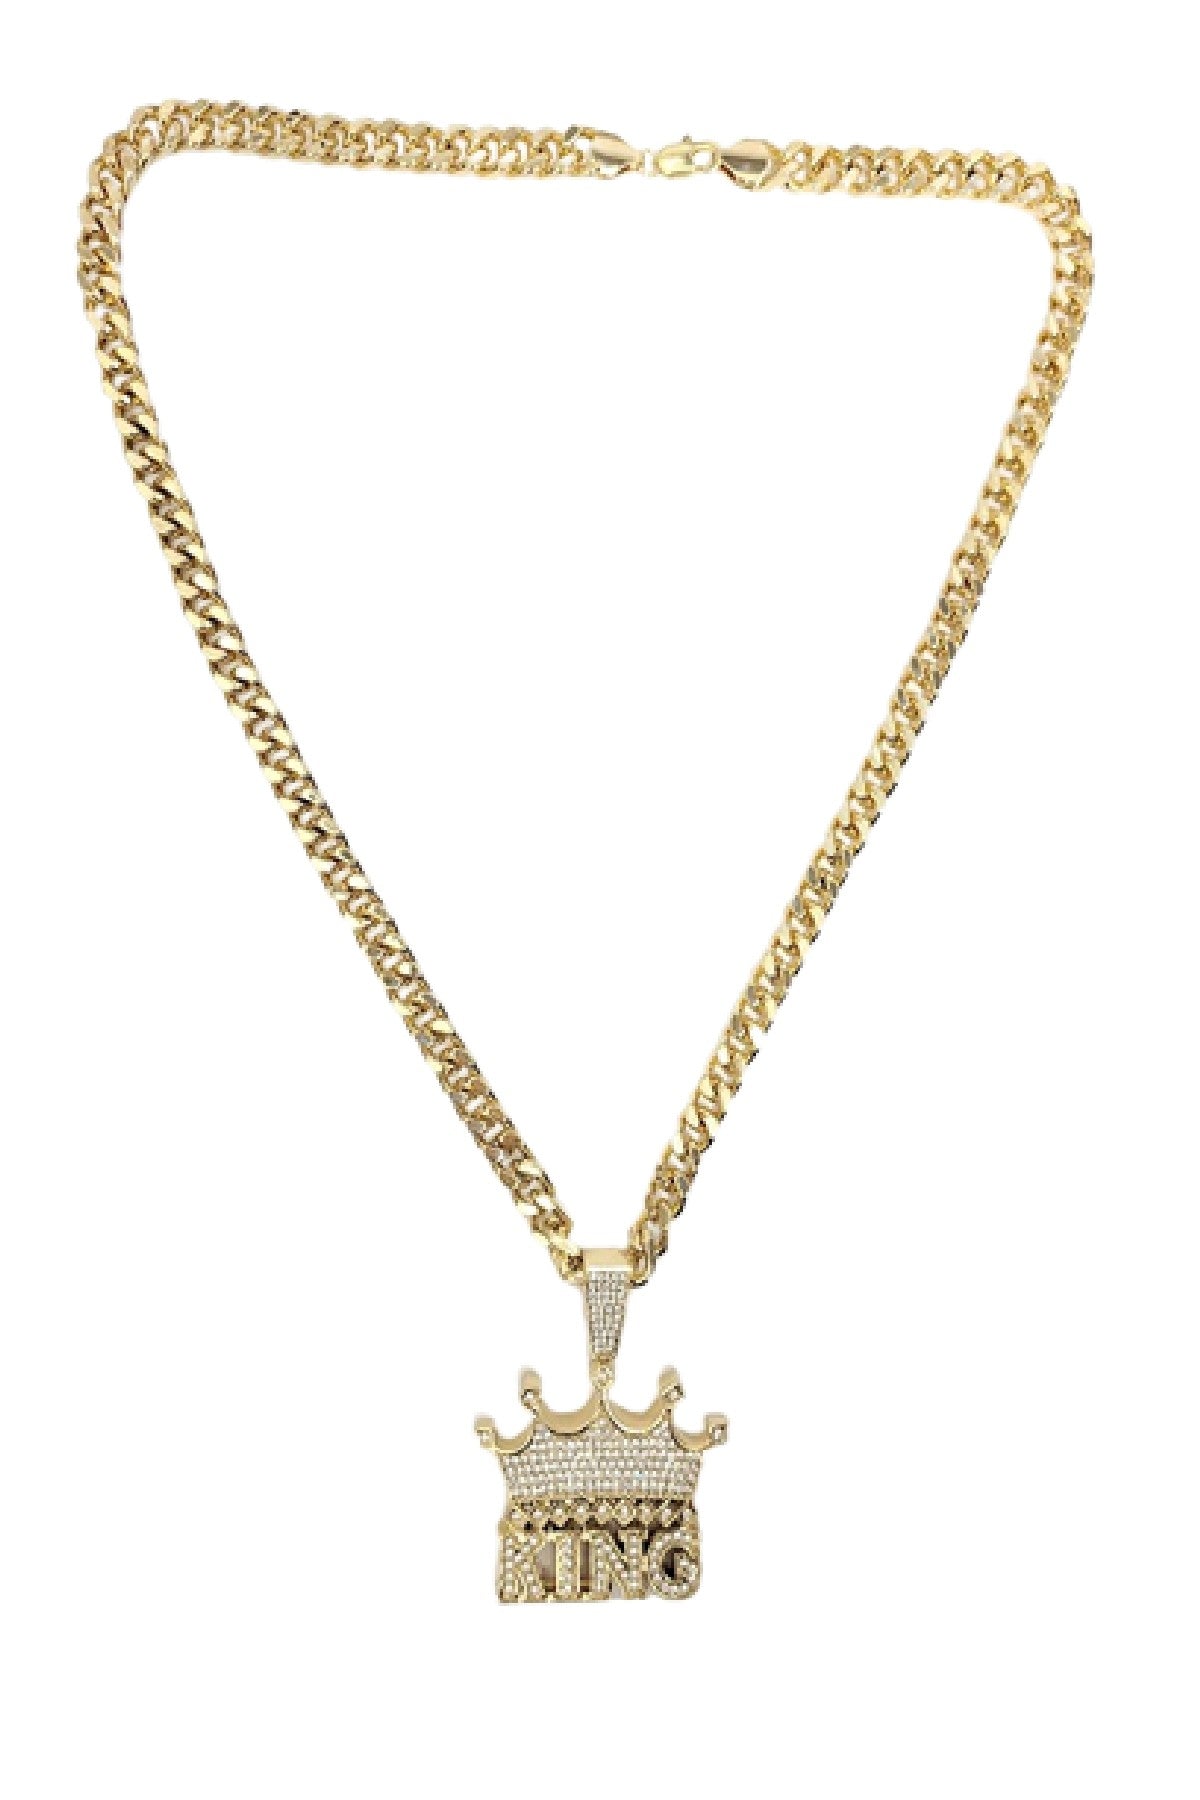 HIP HOP ICED OUT KING PENDANT CUBAN CHAIN